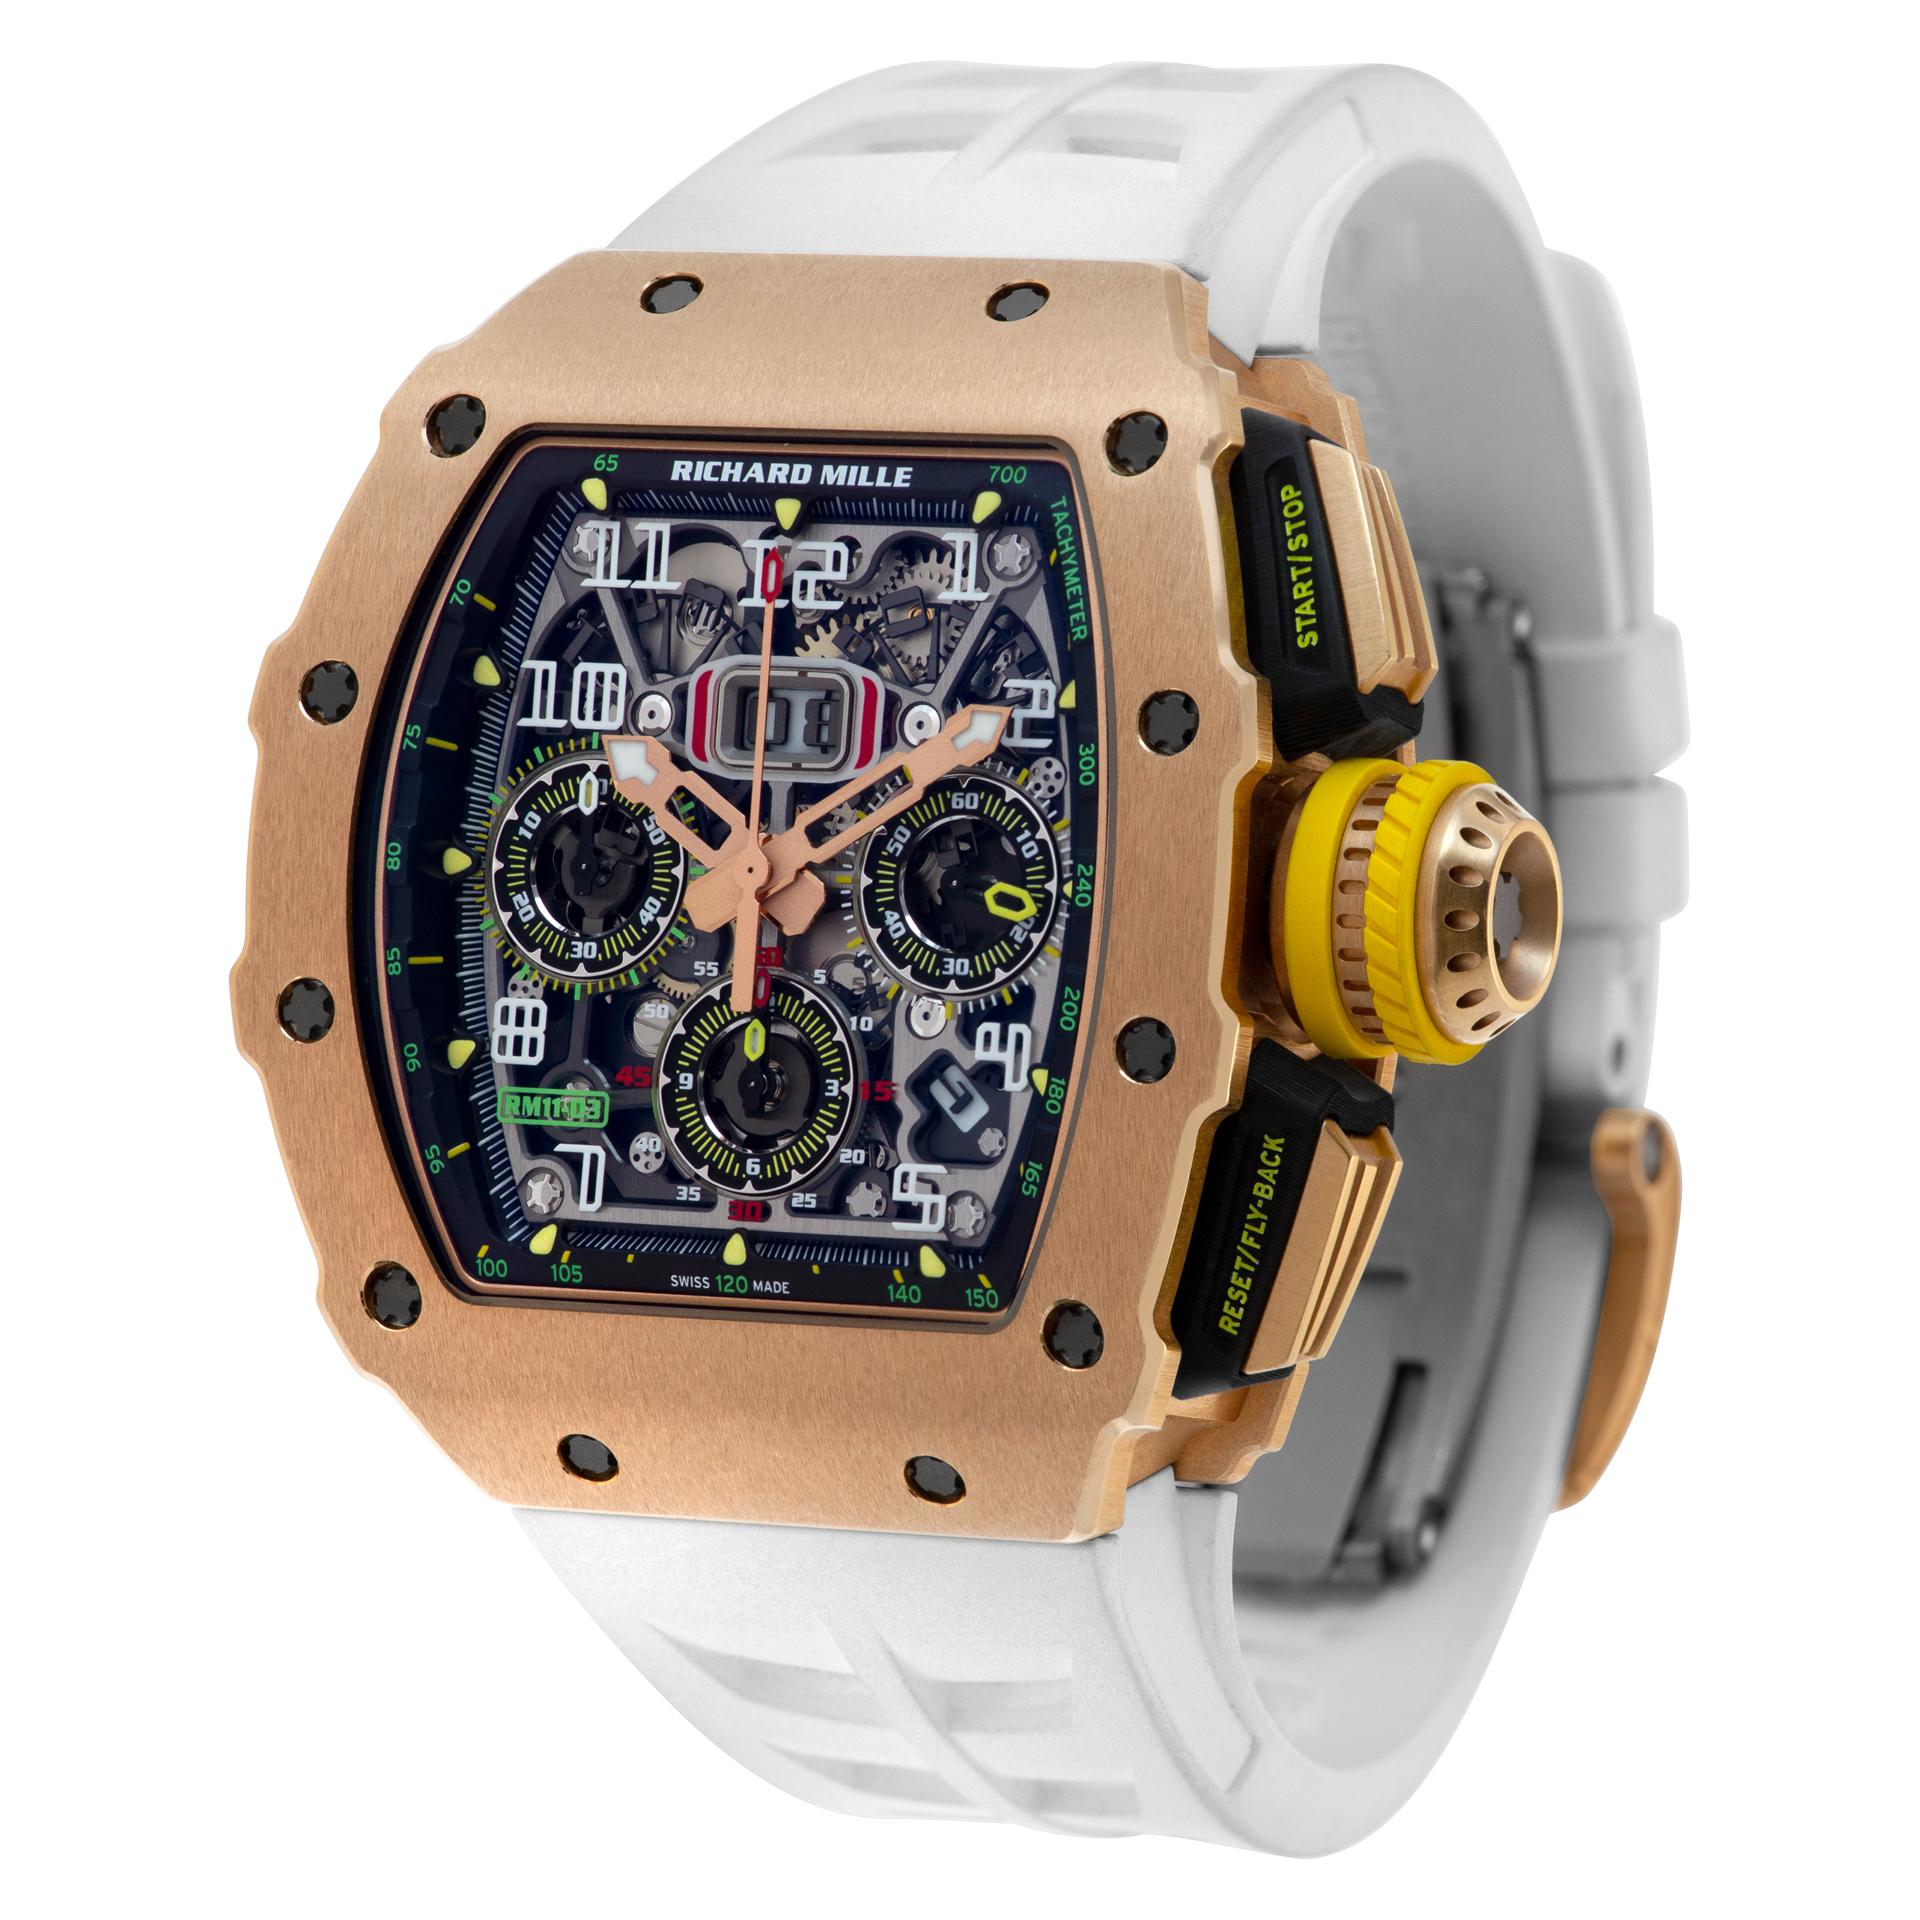 This ICONIC Richard Mille is uber collectible in brushed 18k rose gold with skeleton dial on a white rubber band. Auto w/ date, month and chronograph. 45 mm case size. With box and papers, warranty card and certificate, sealed, never opened. Ref